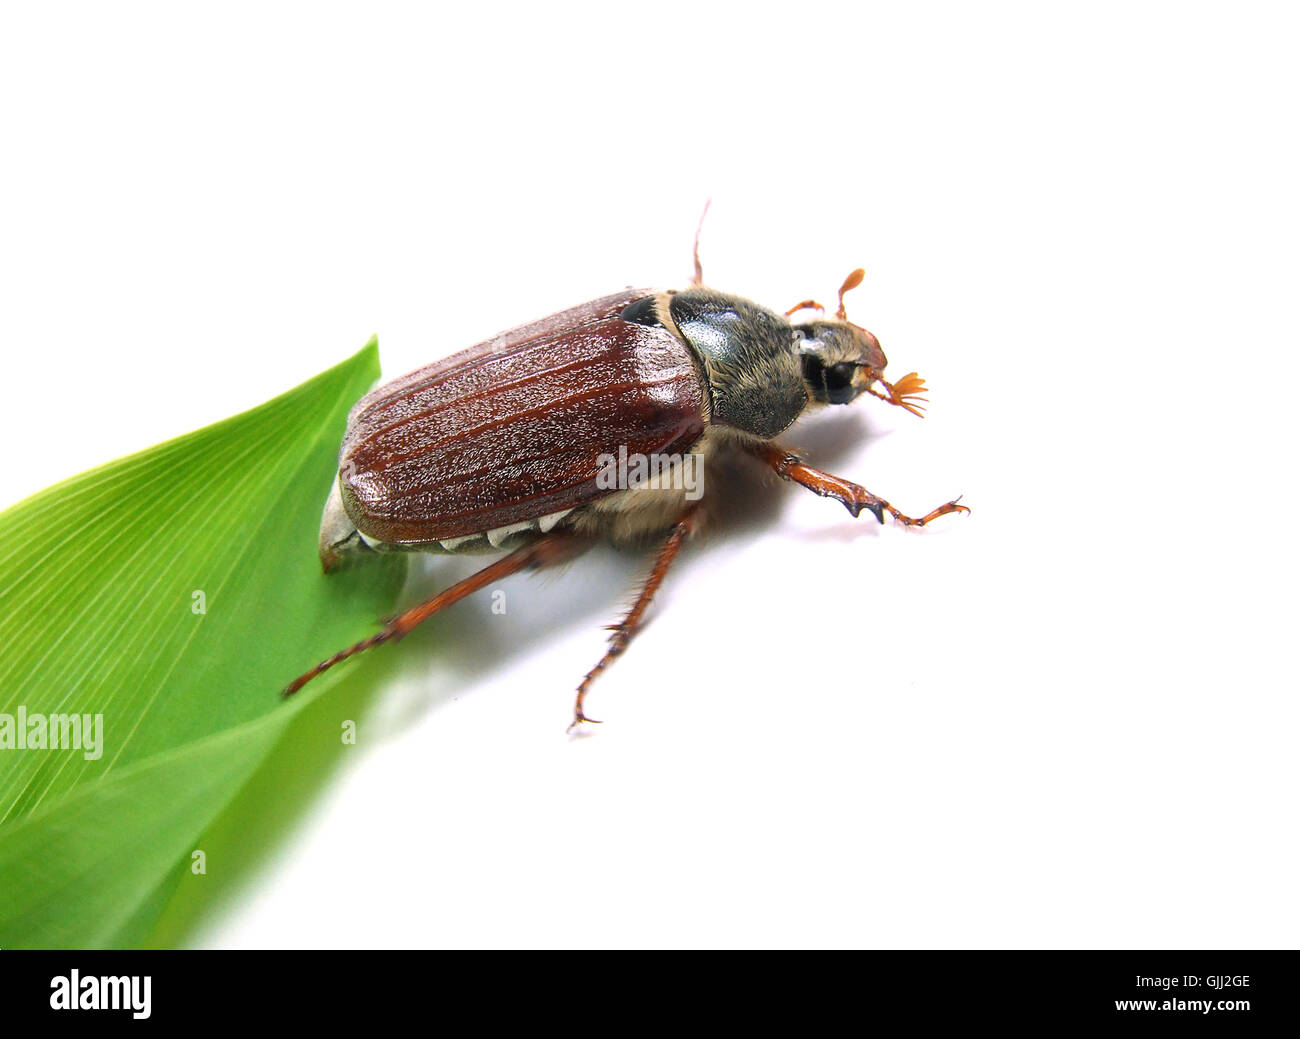 insect insects beetle Stock Photo